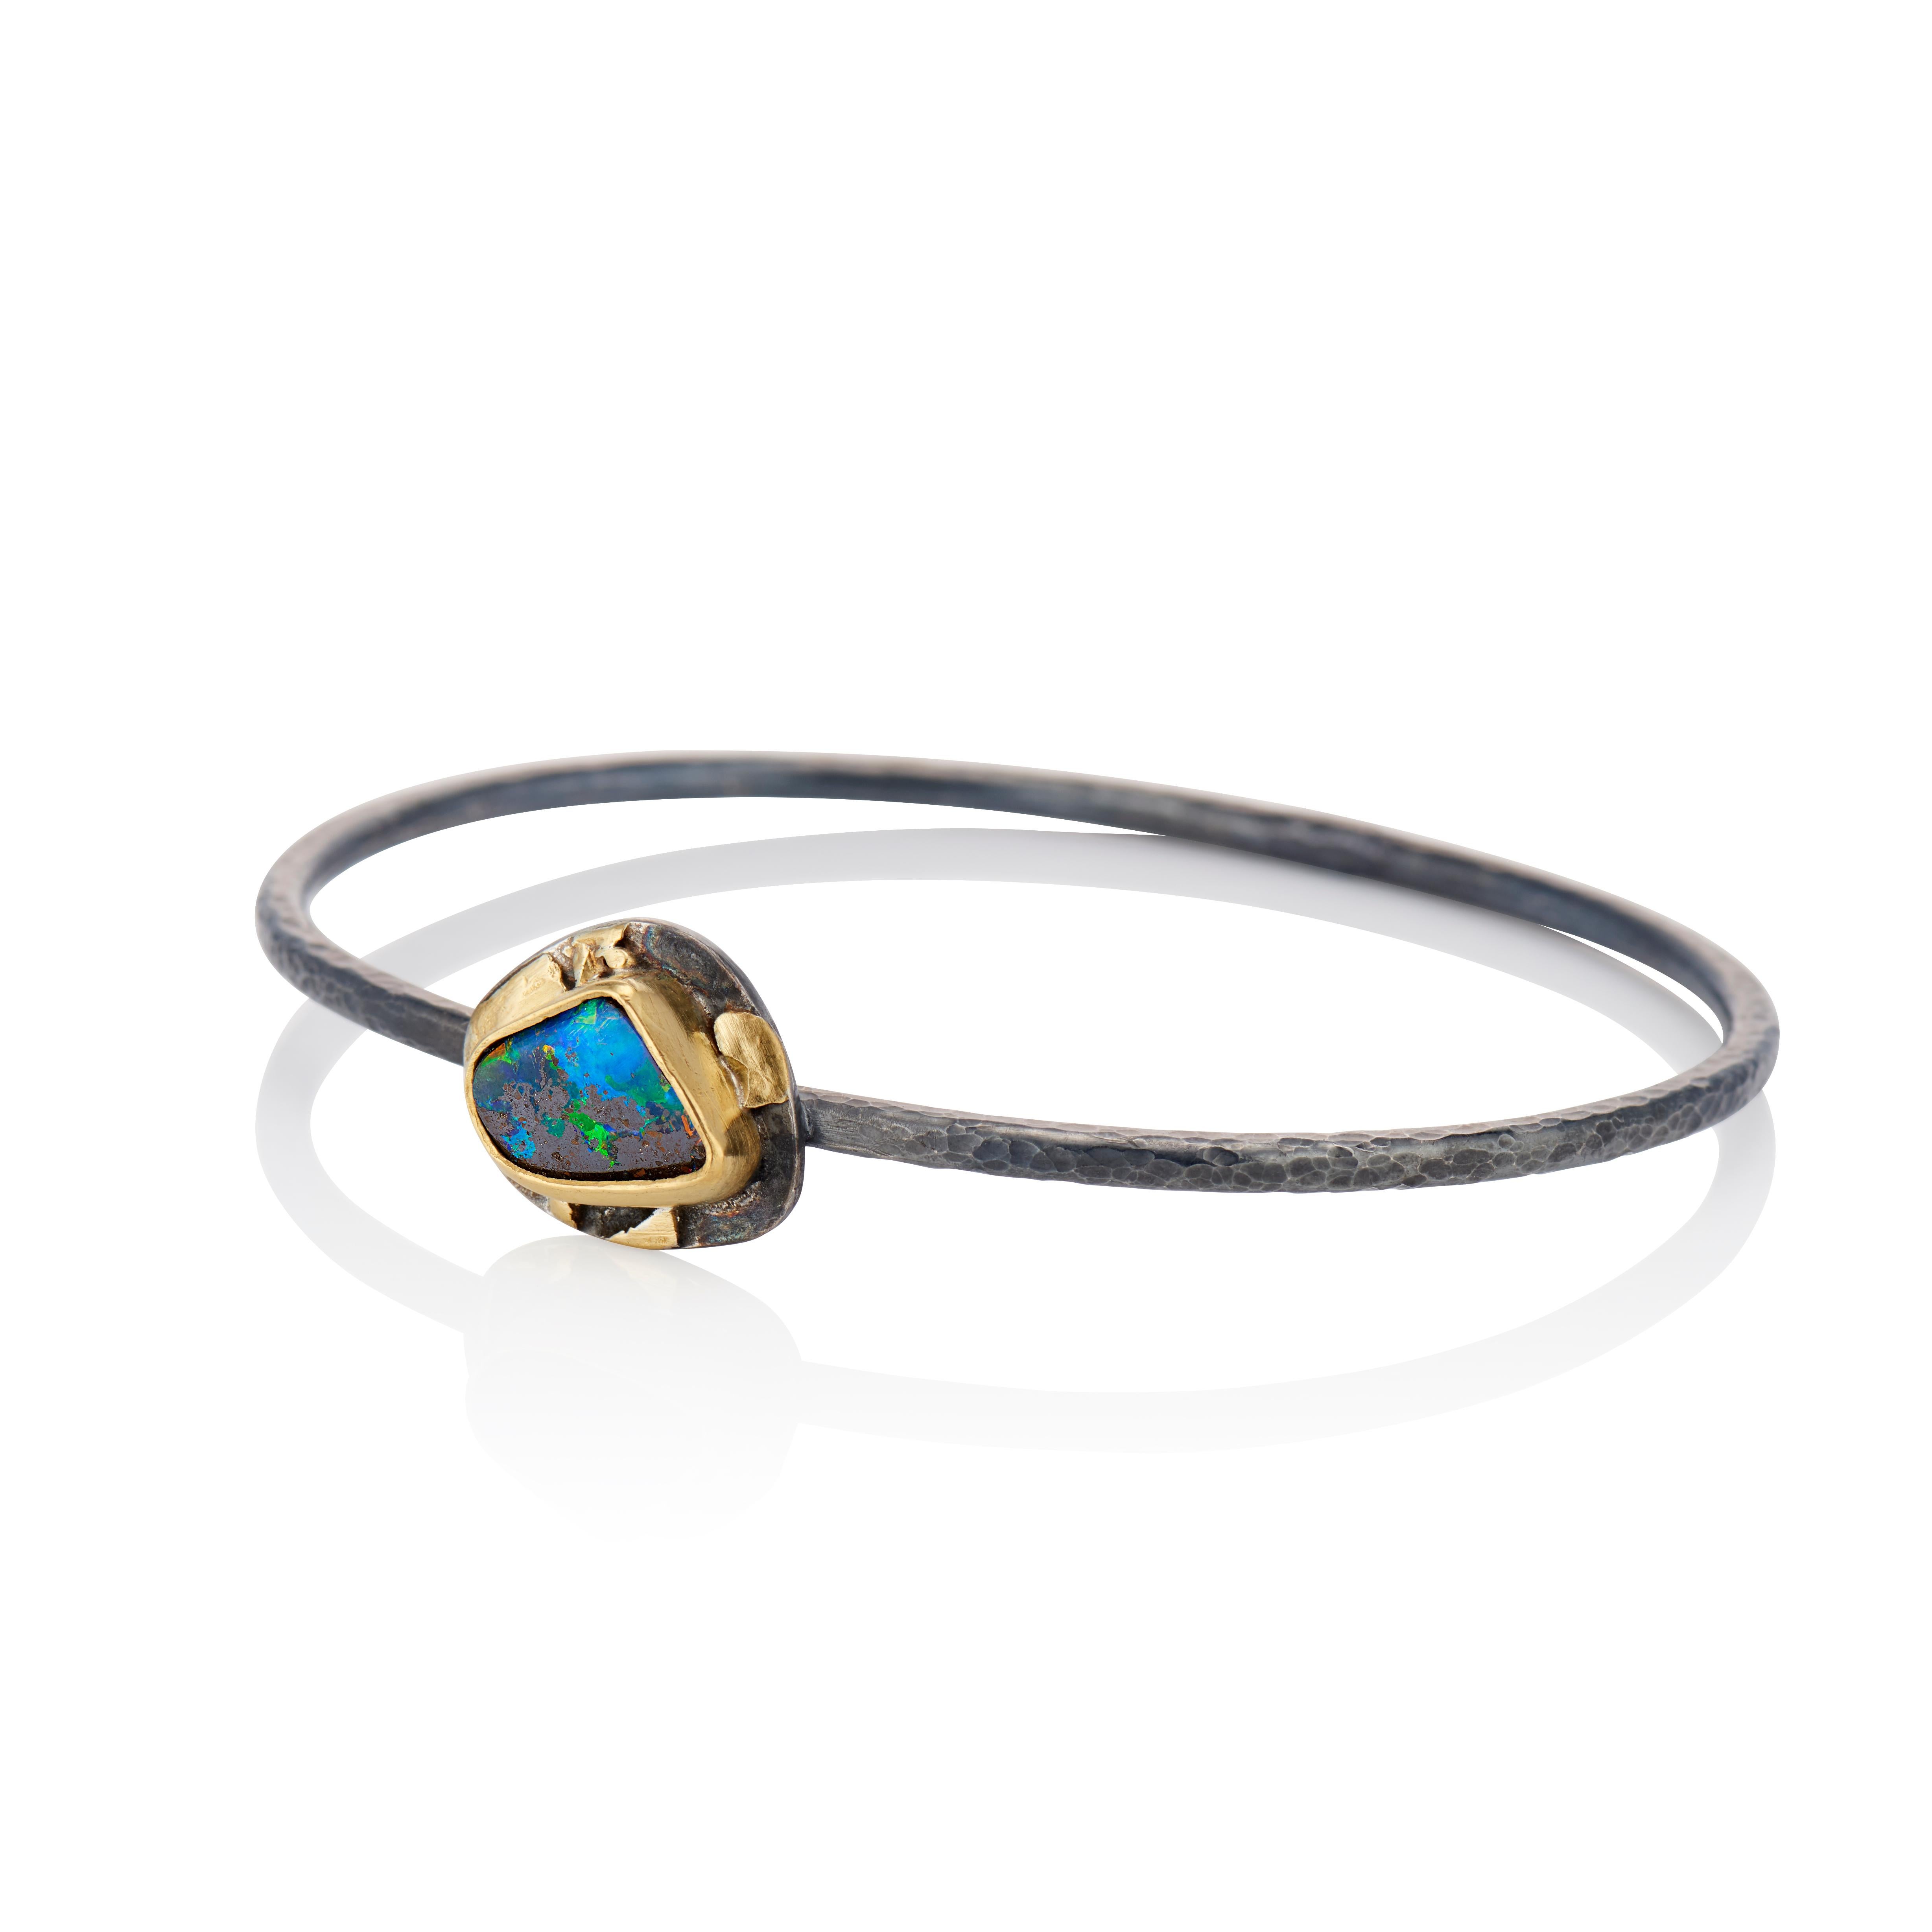 Oval Cut Contemporary Opal Bangle Bracelet Oxidized Sterling Silver 22 Karat Yellow Gold For Sale